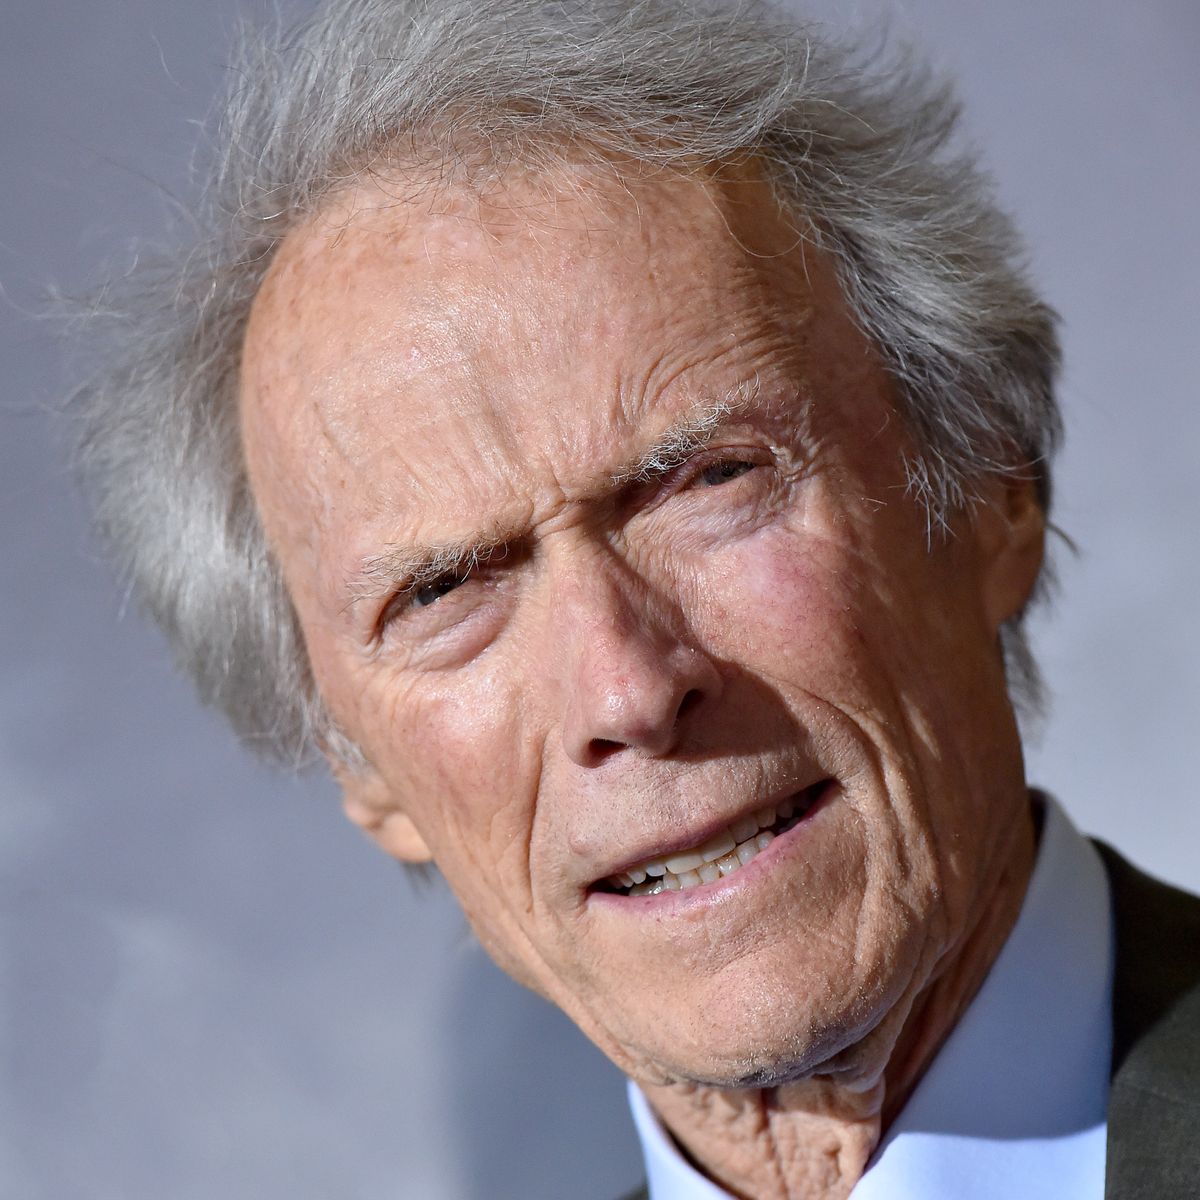 Clint Eastwood Refuses To Evacuate Wildfires For Film Edits